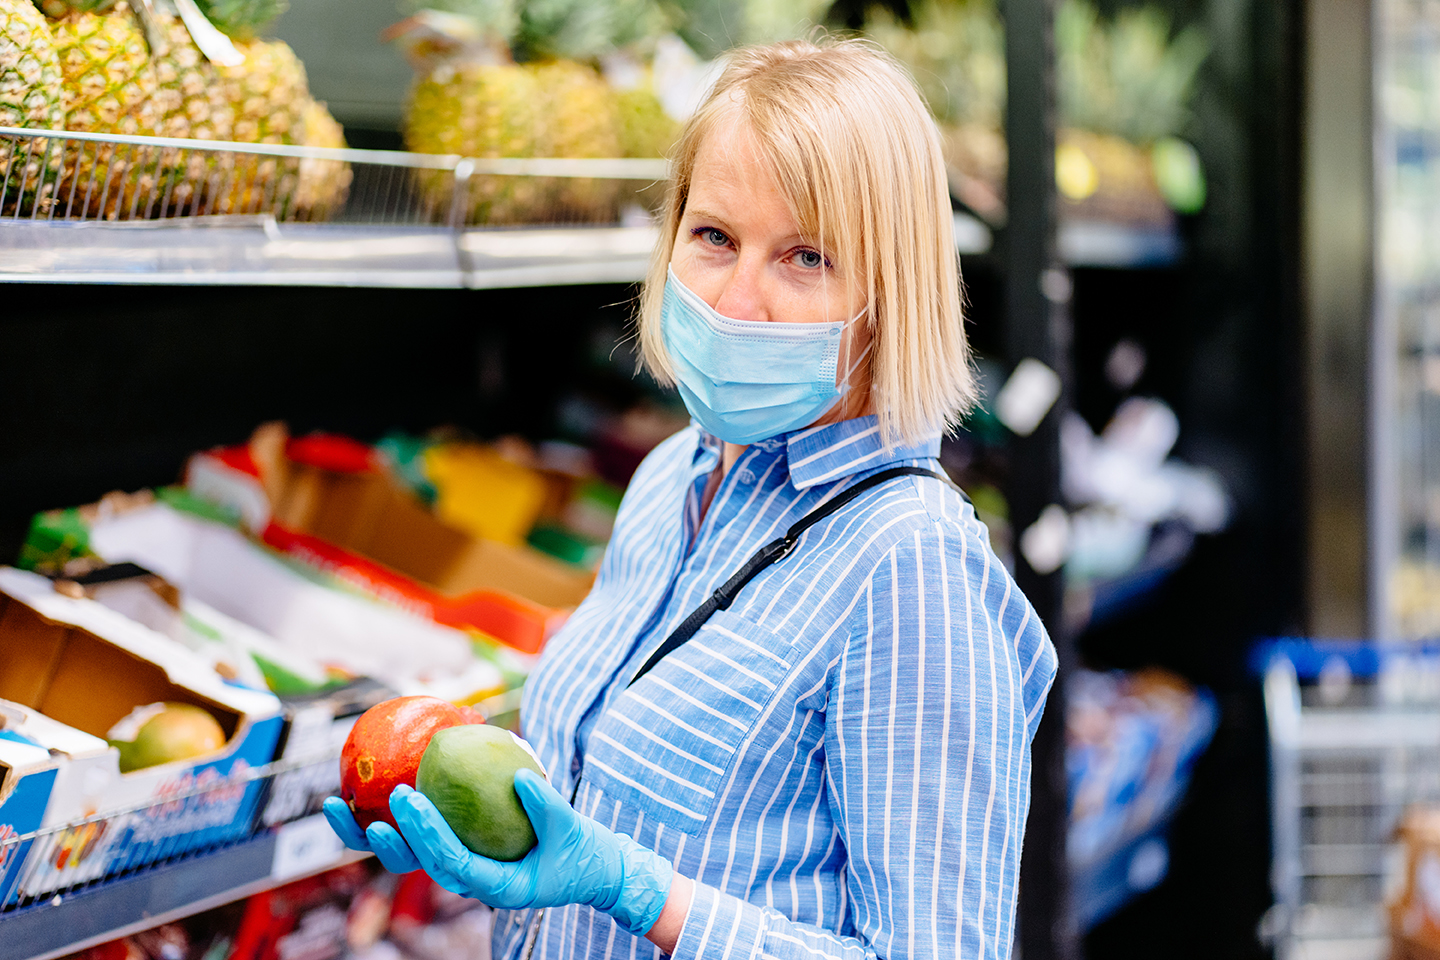 A woman shopping for groceries with a protective mask and gloves